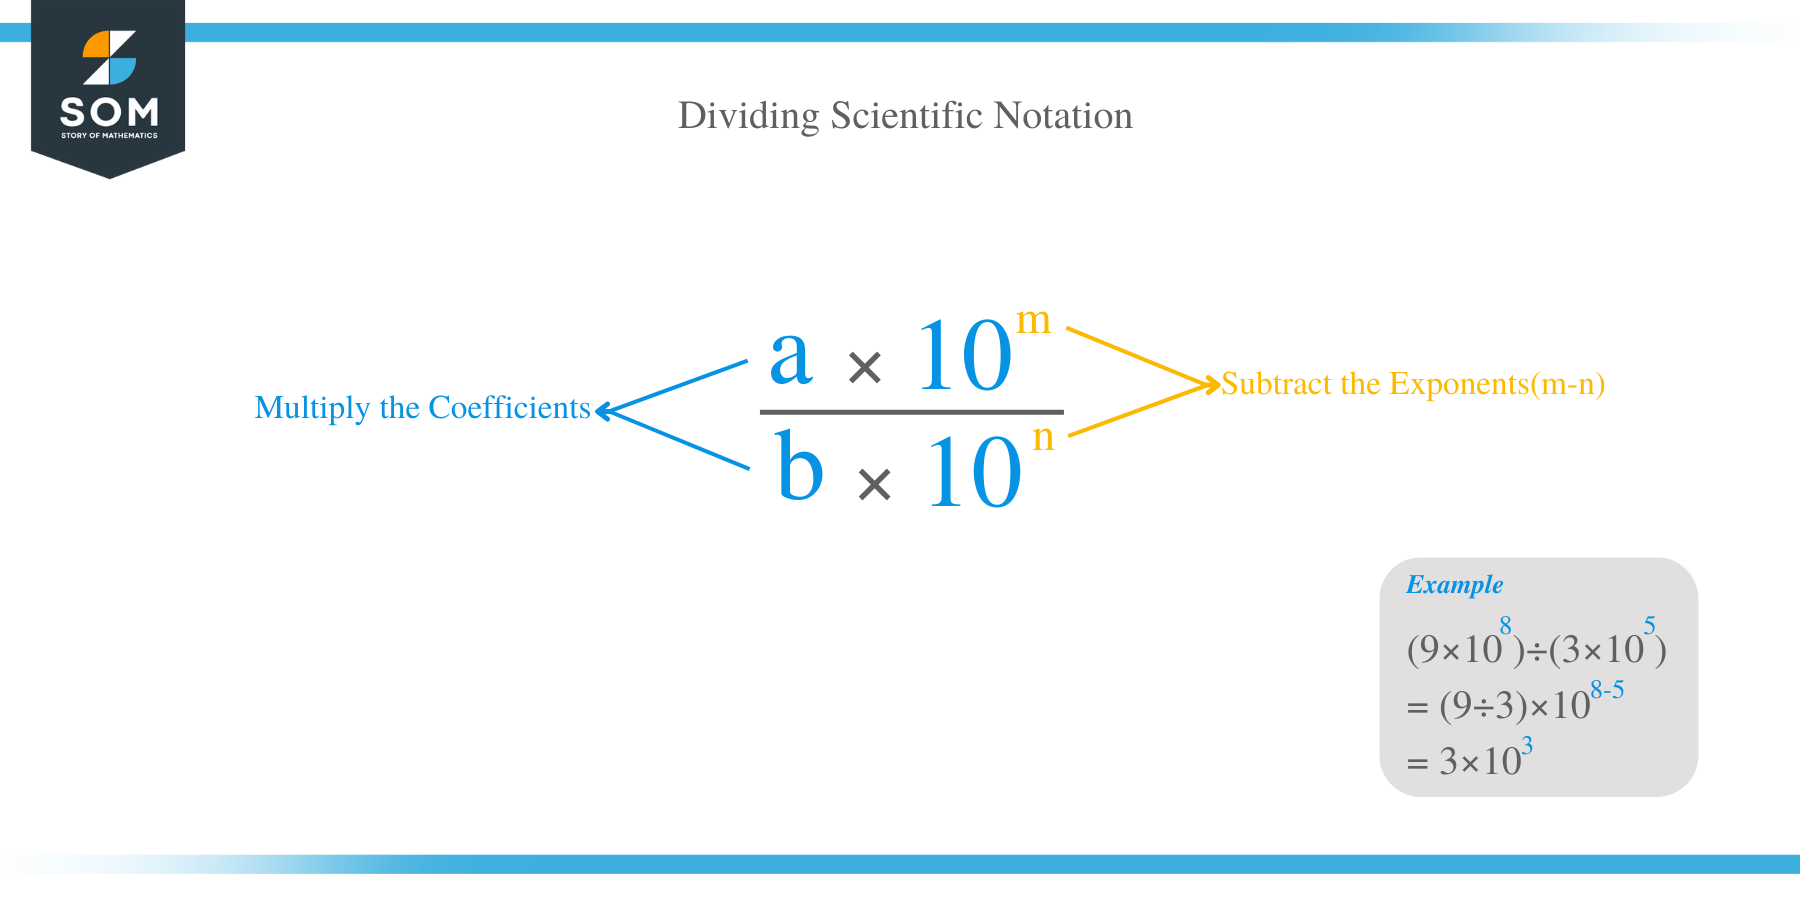 How to Divide Scientific Notation?